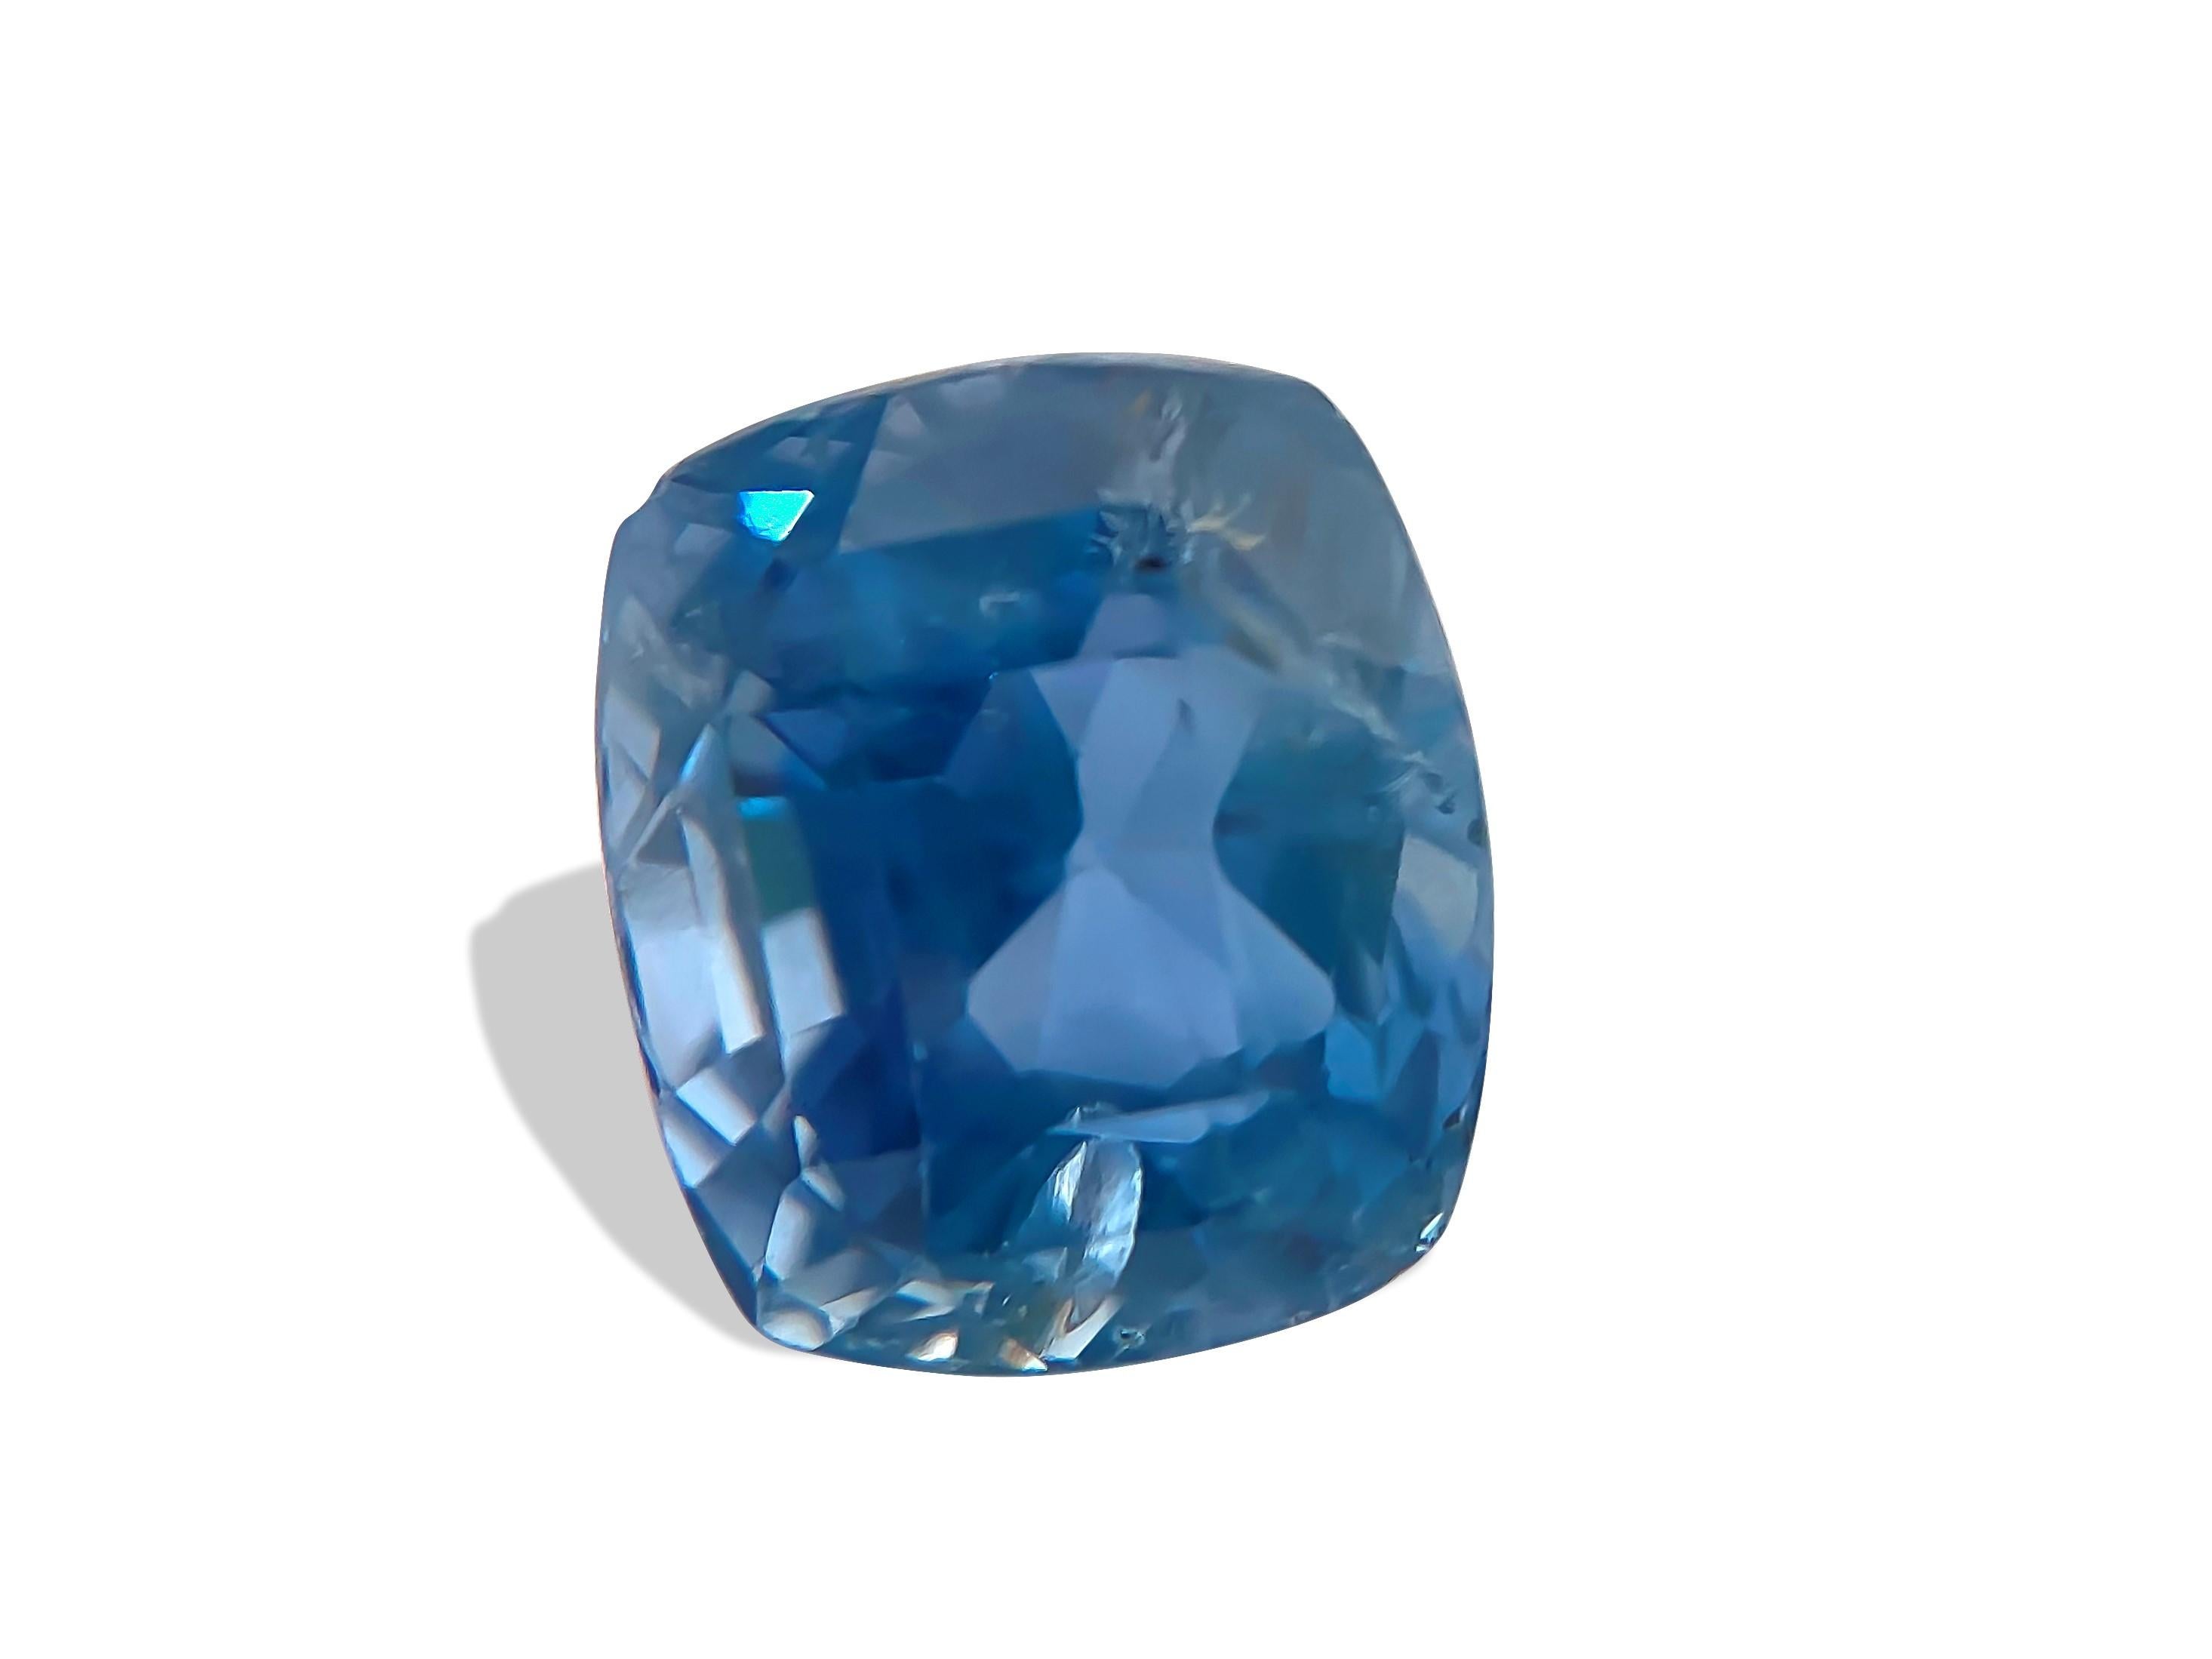 This magnificent blue sapphire, weighing 7.02 carats, is a true natural wonder, untouched by heat treatment, and sourced directly from the earth. Its captivating cushion cut showcases its remarkable beauty, making it a standout piece on its own.